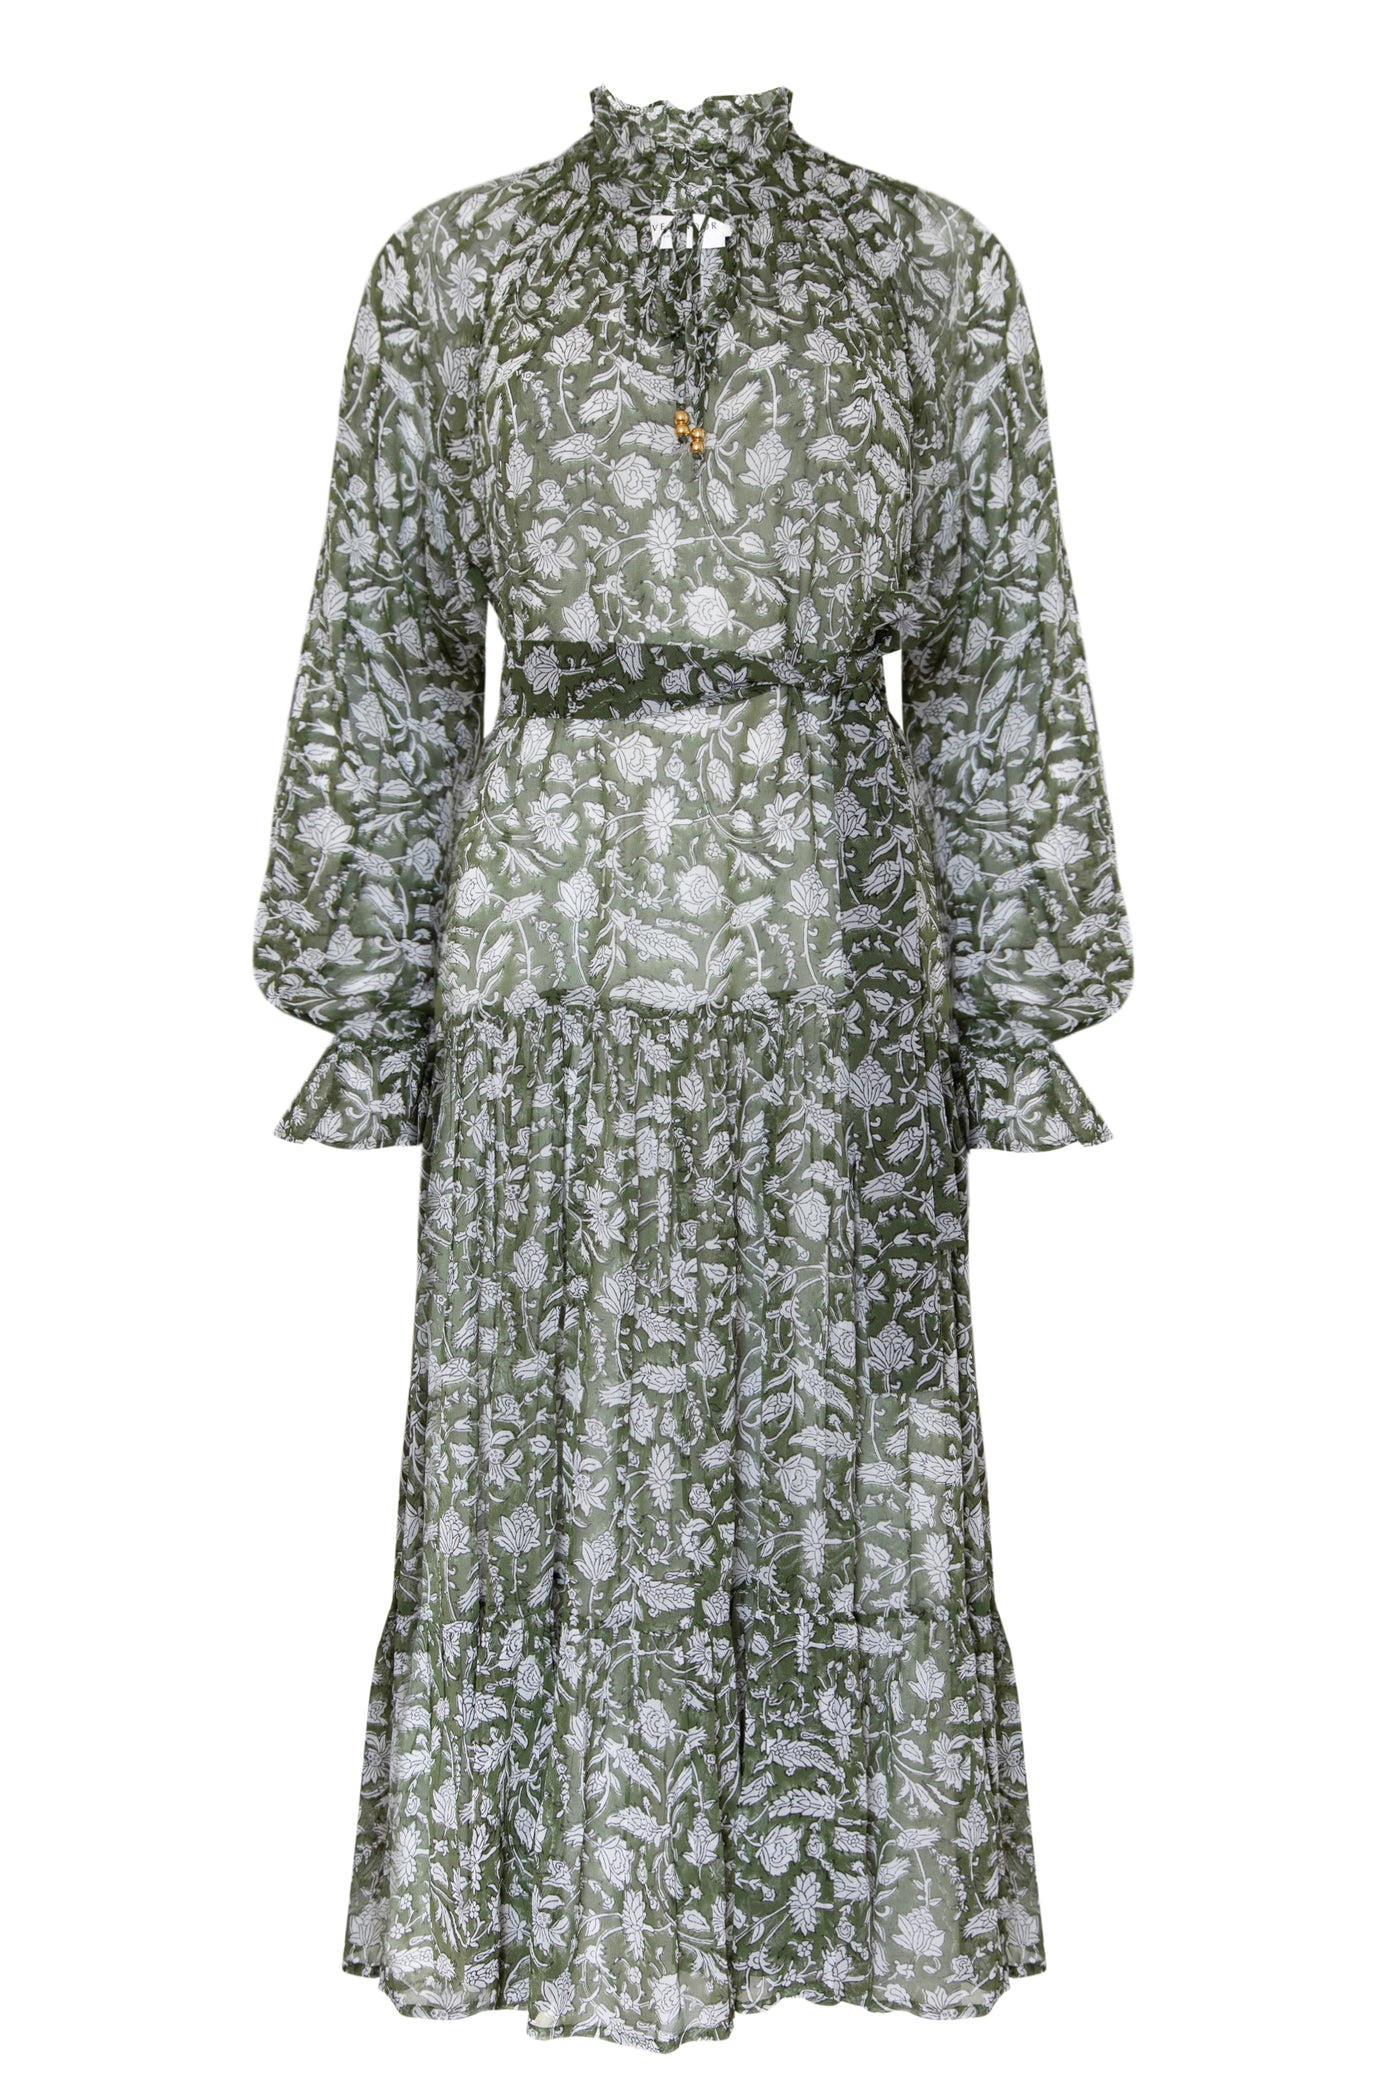 Tilly Dress in Forest Leaves